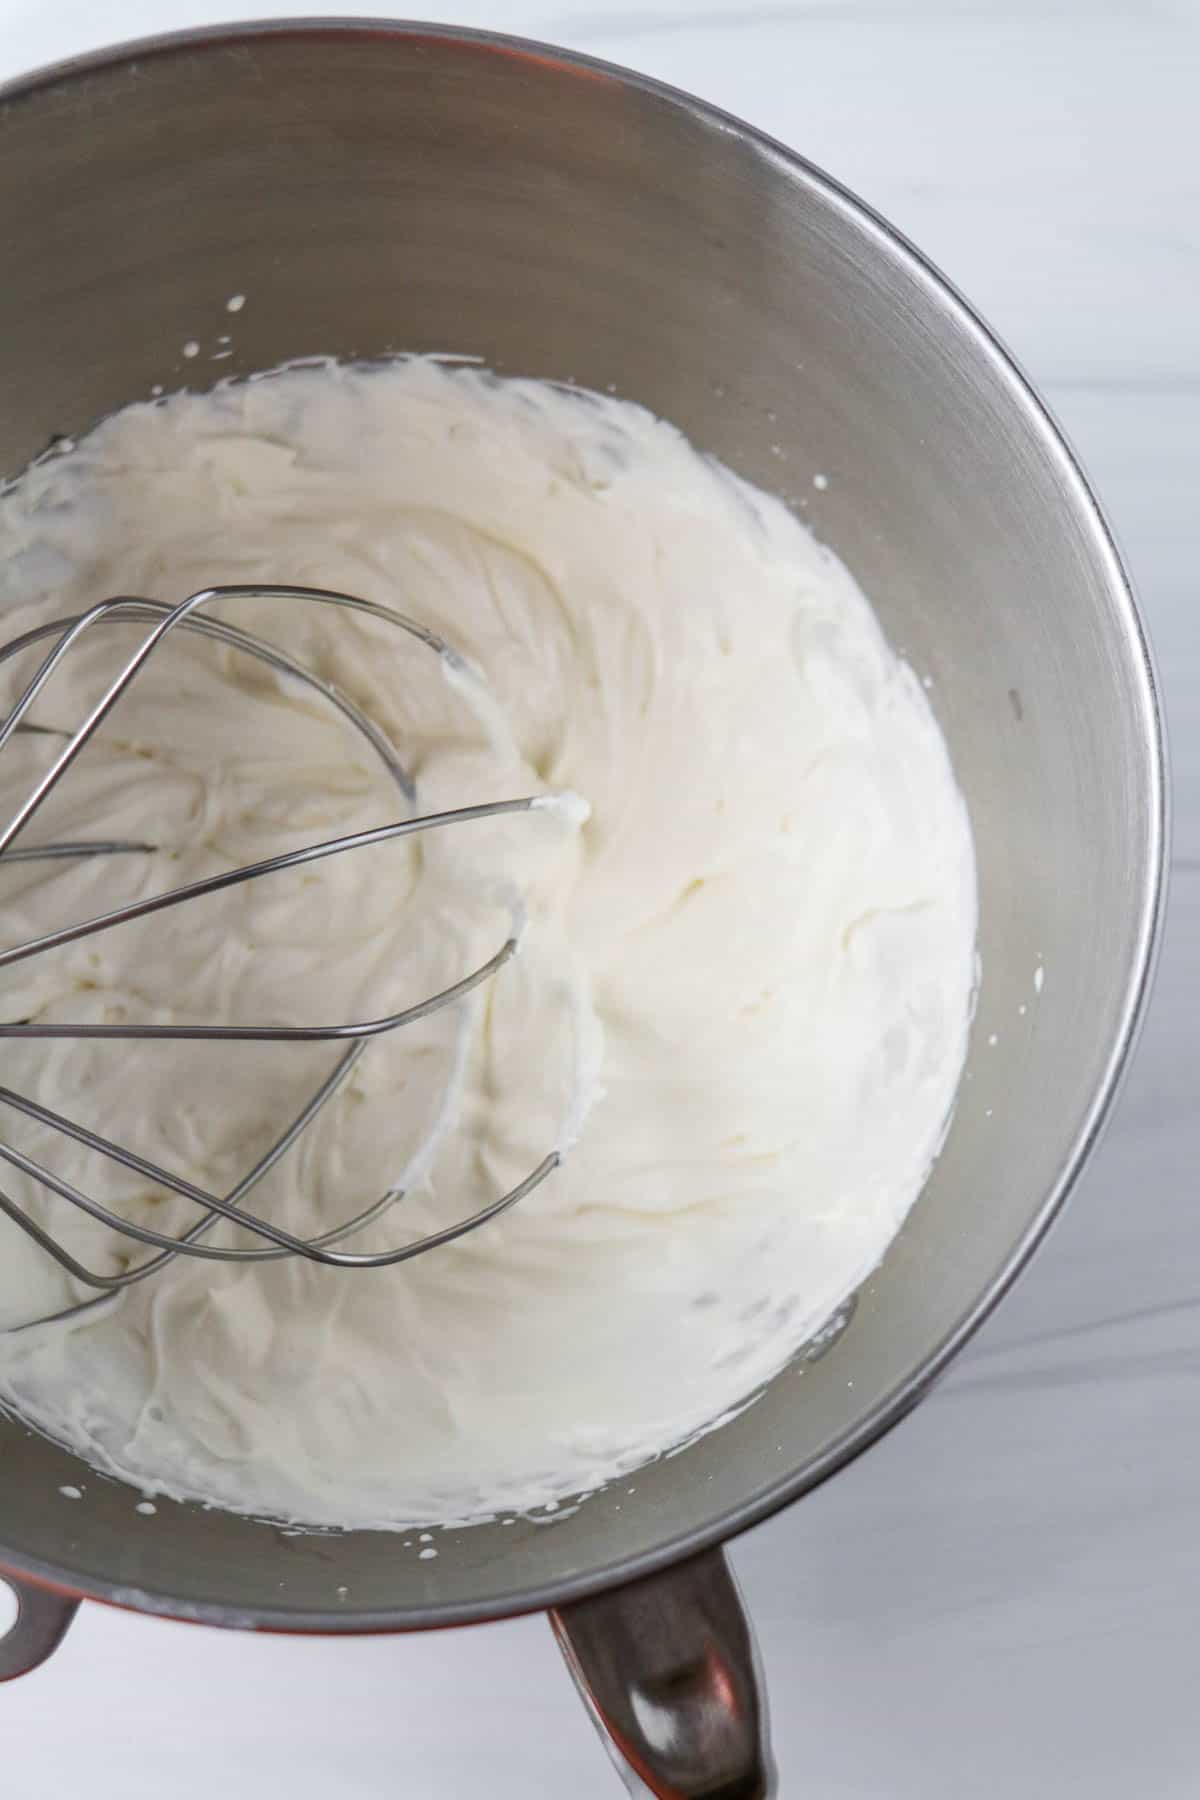 Whipped cream in a metal bowl with a whisk attachment.